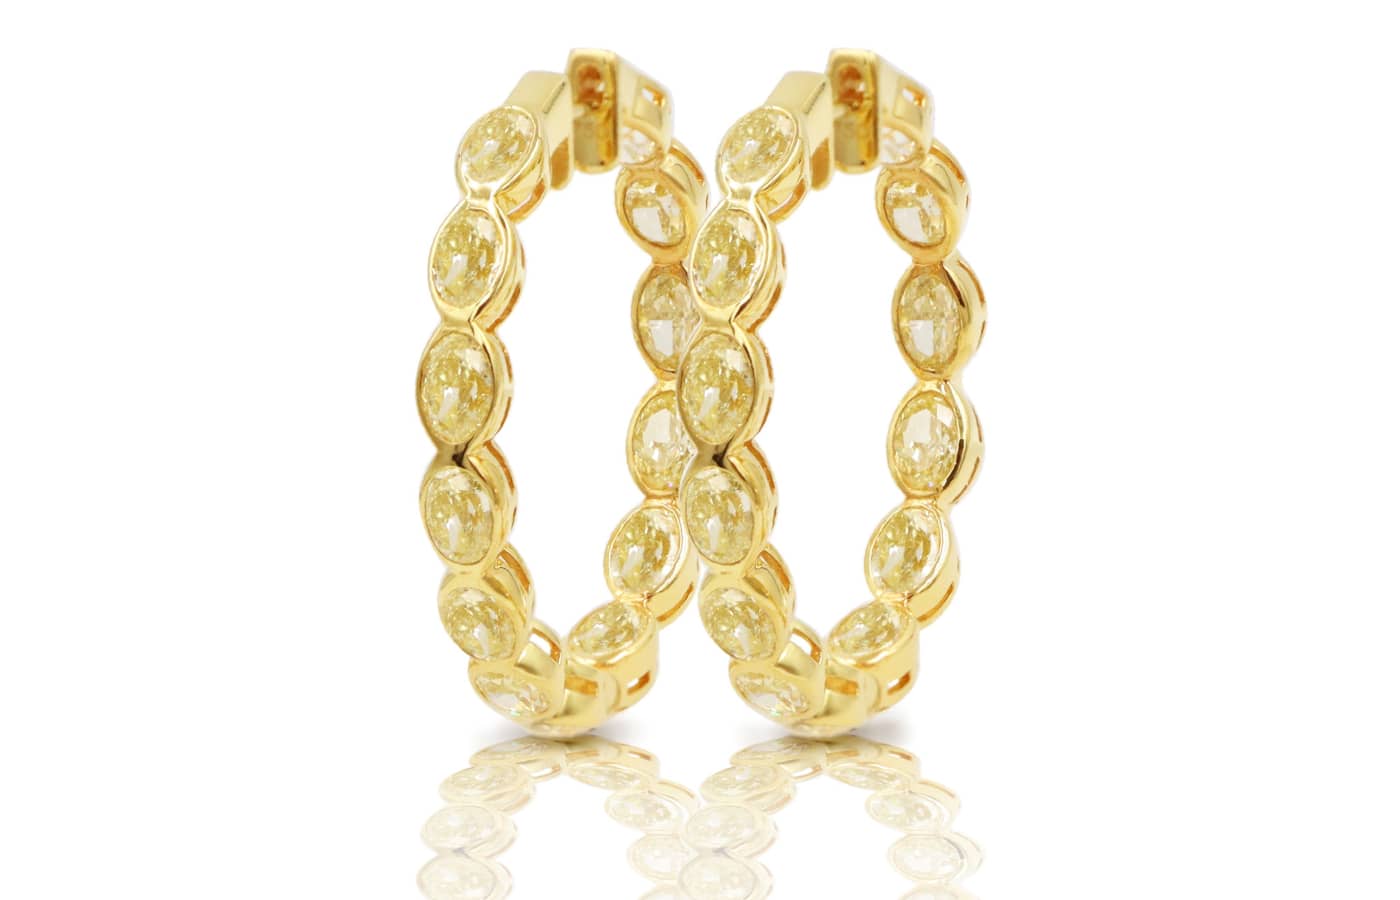 Anan Jewels Yellow Oval Hoop earrings in gold and yellow diamonds